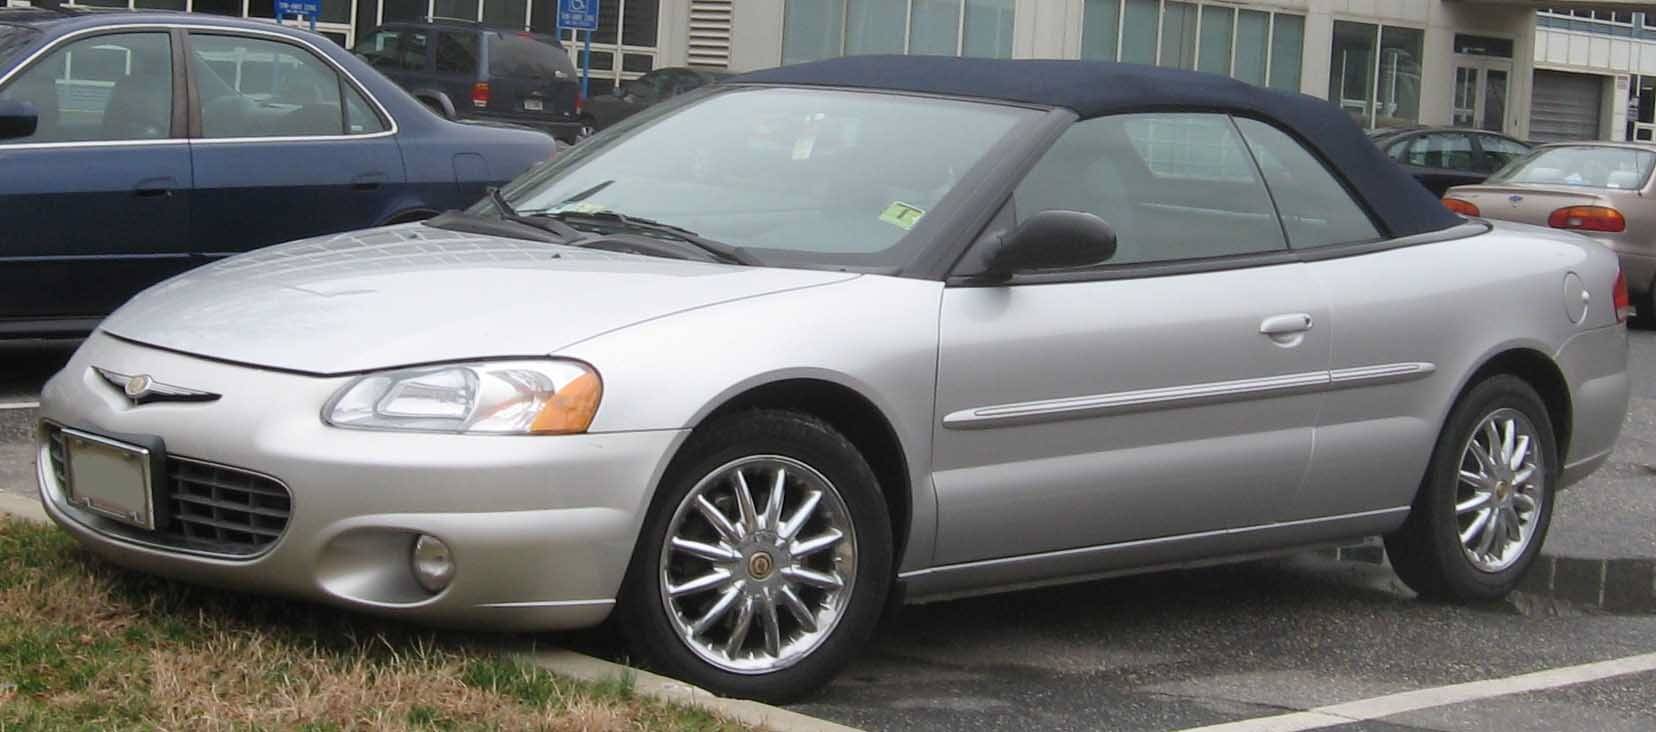 2001 sebring coupe tire size